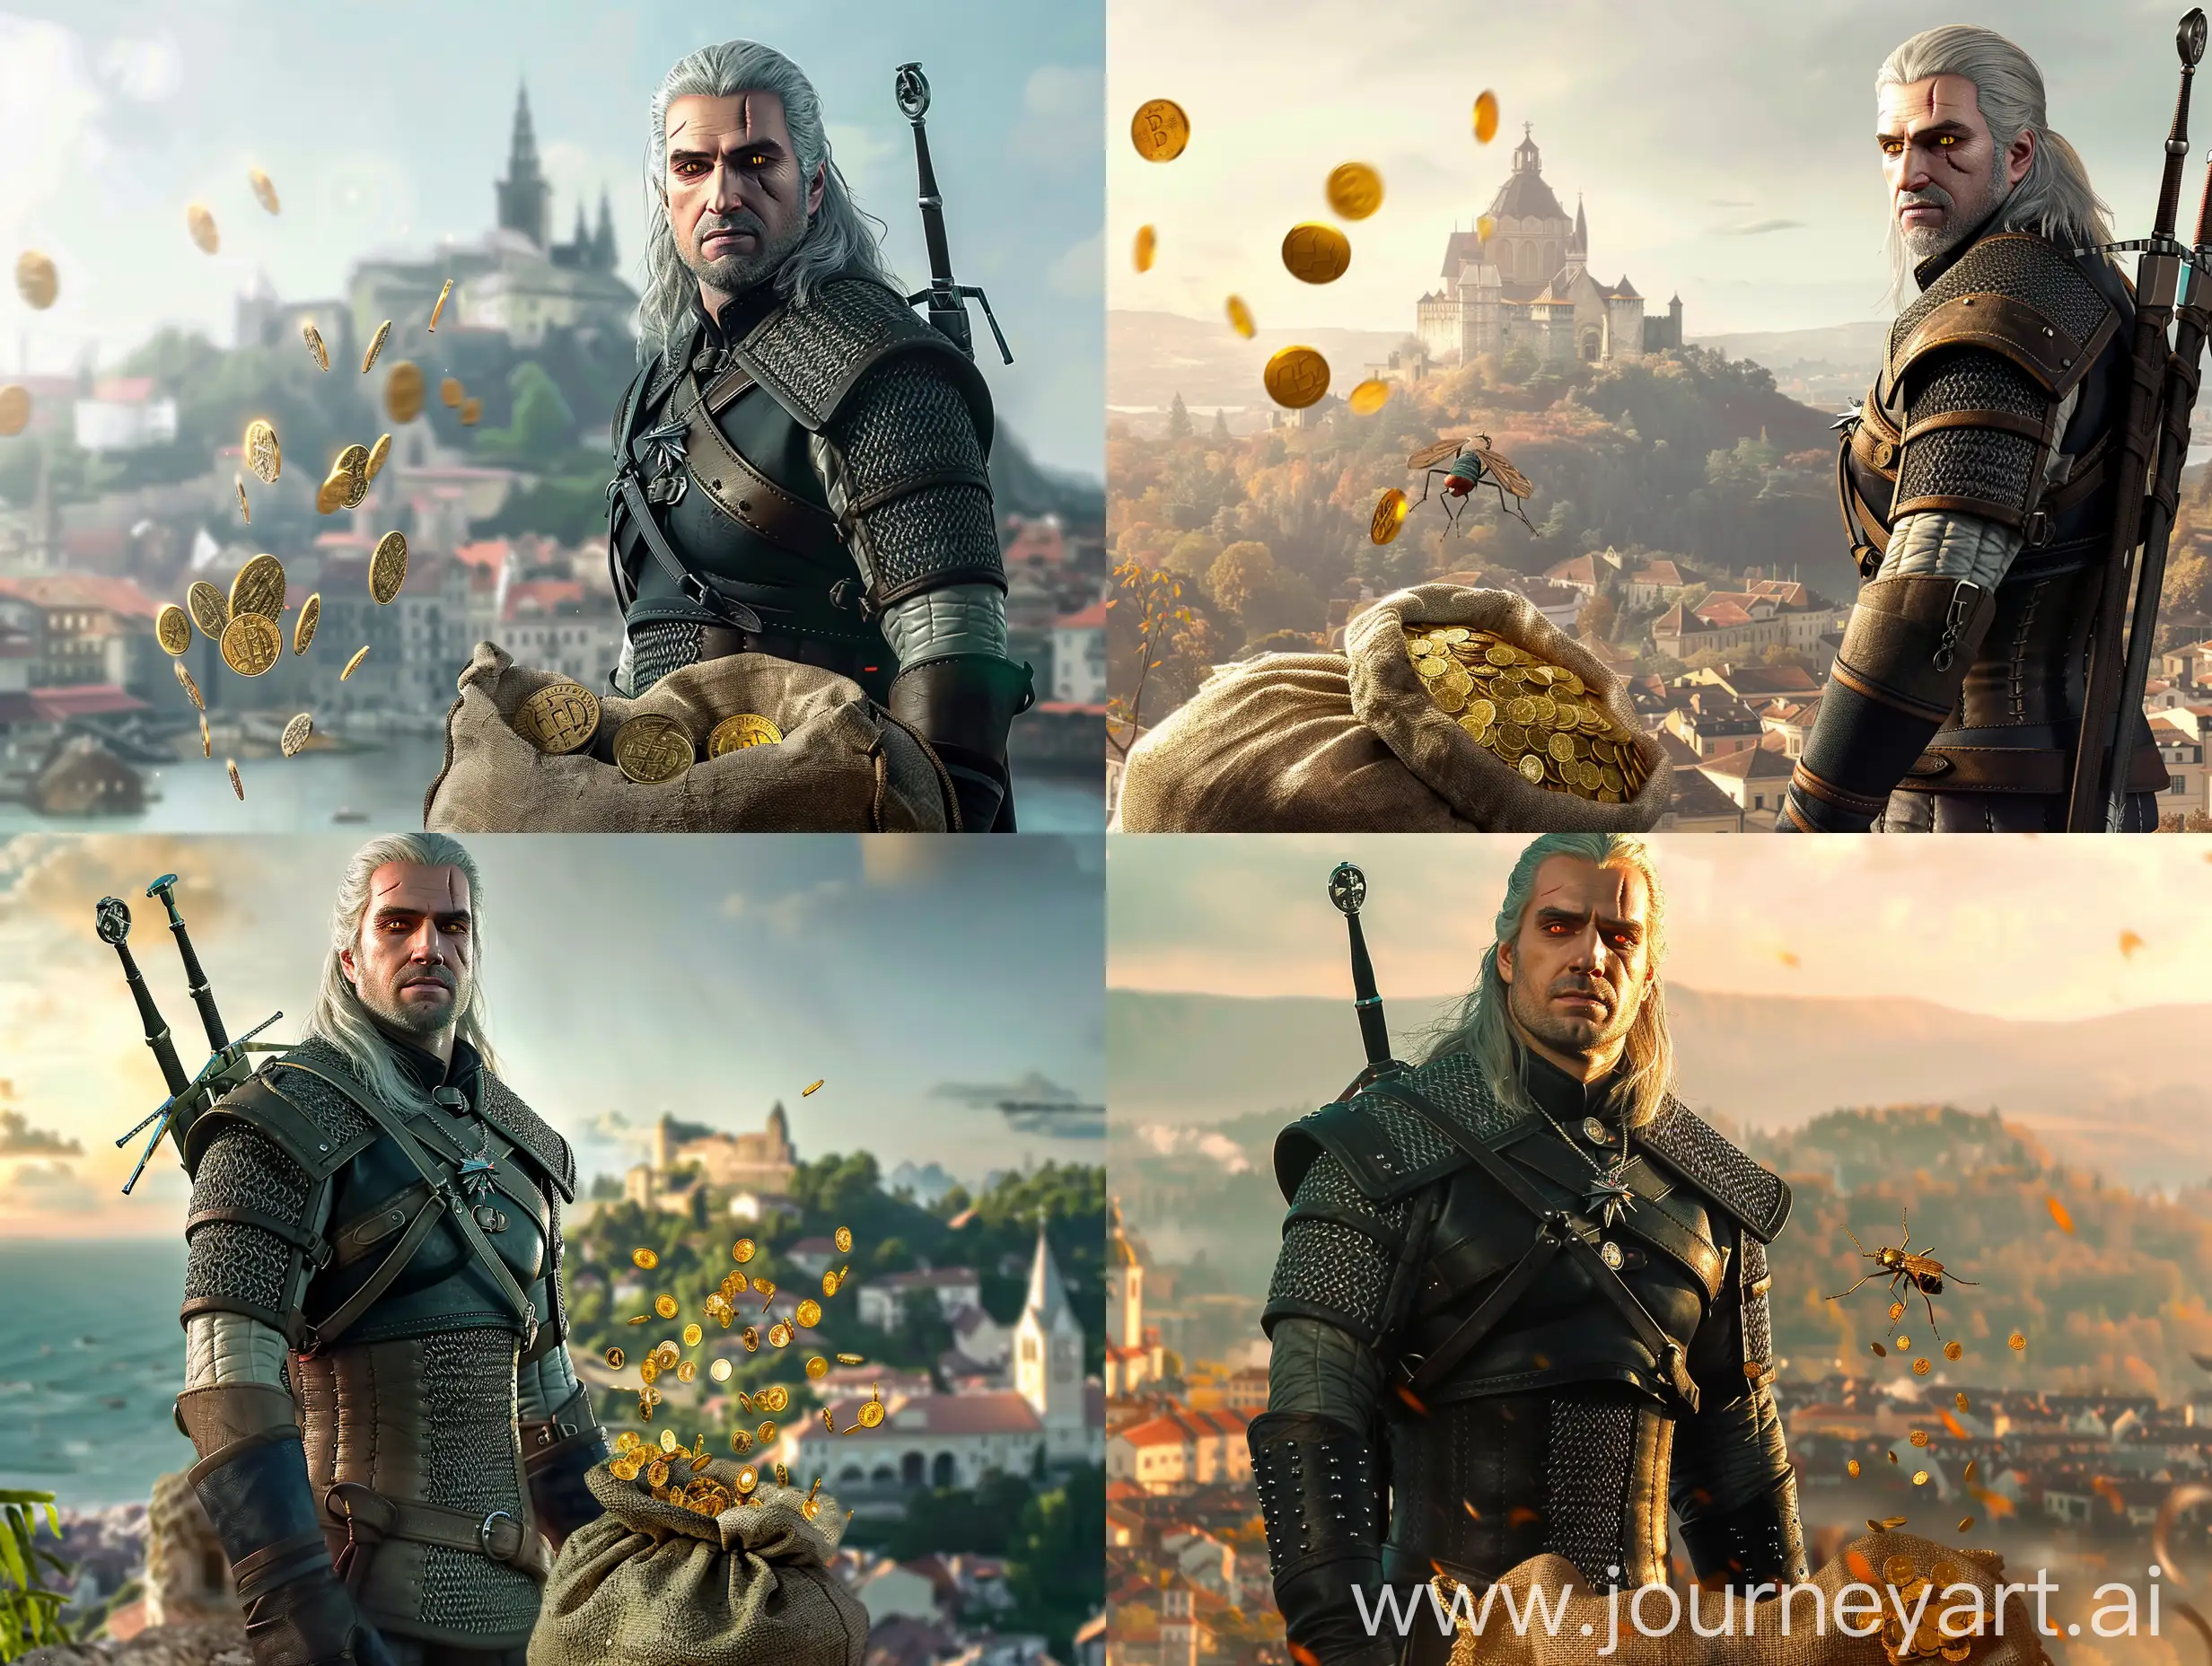 The Witcher Geralt stands against the backdrop of the very beautiful city of Novigrad, looking forward, super realistic, detailed in 4K quality, near his feet lies a large midge with gold coins falling out of the bag  